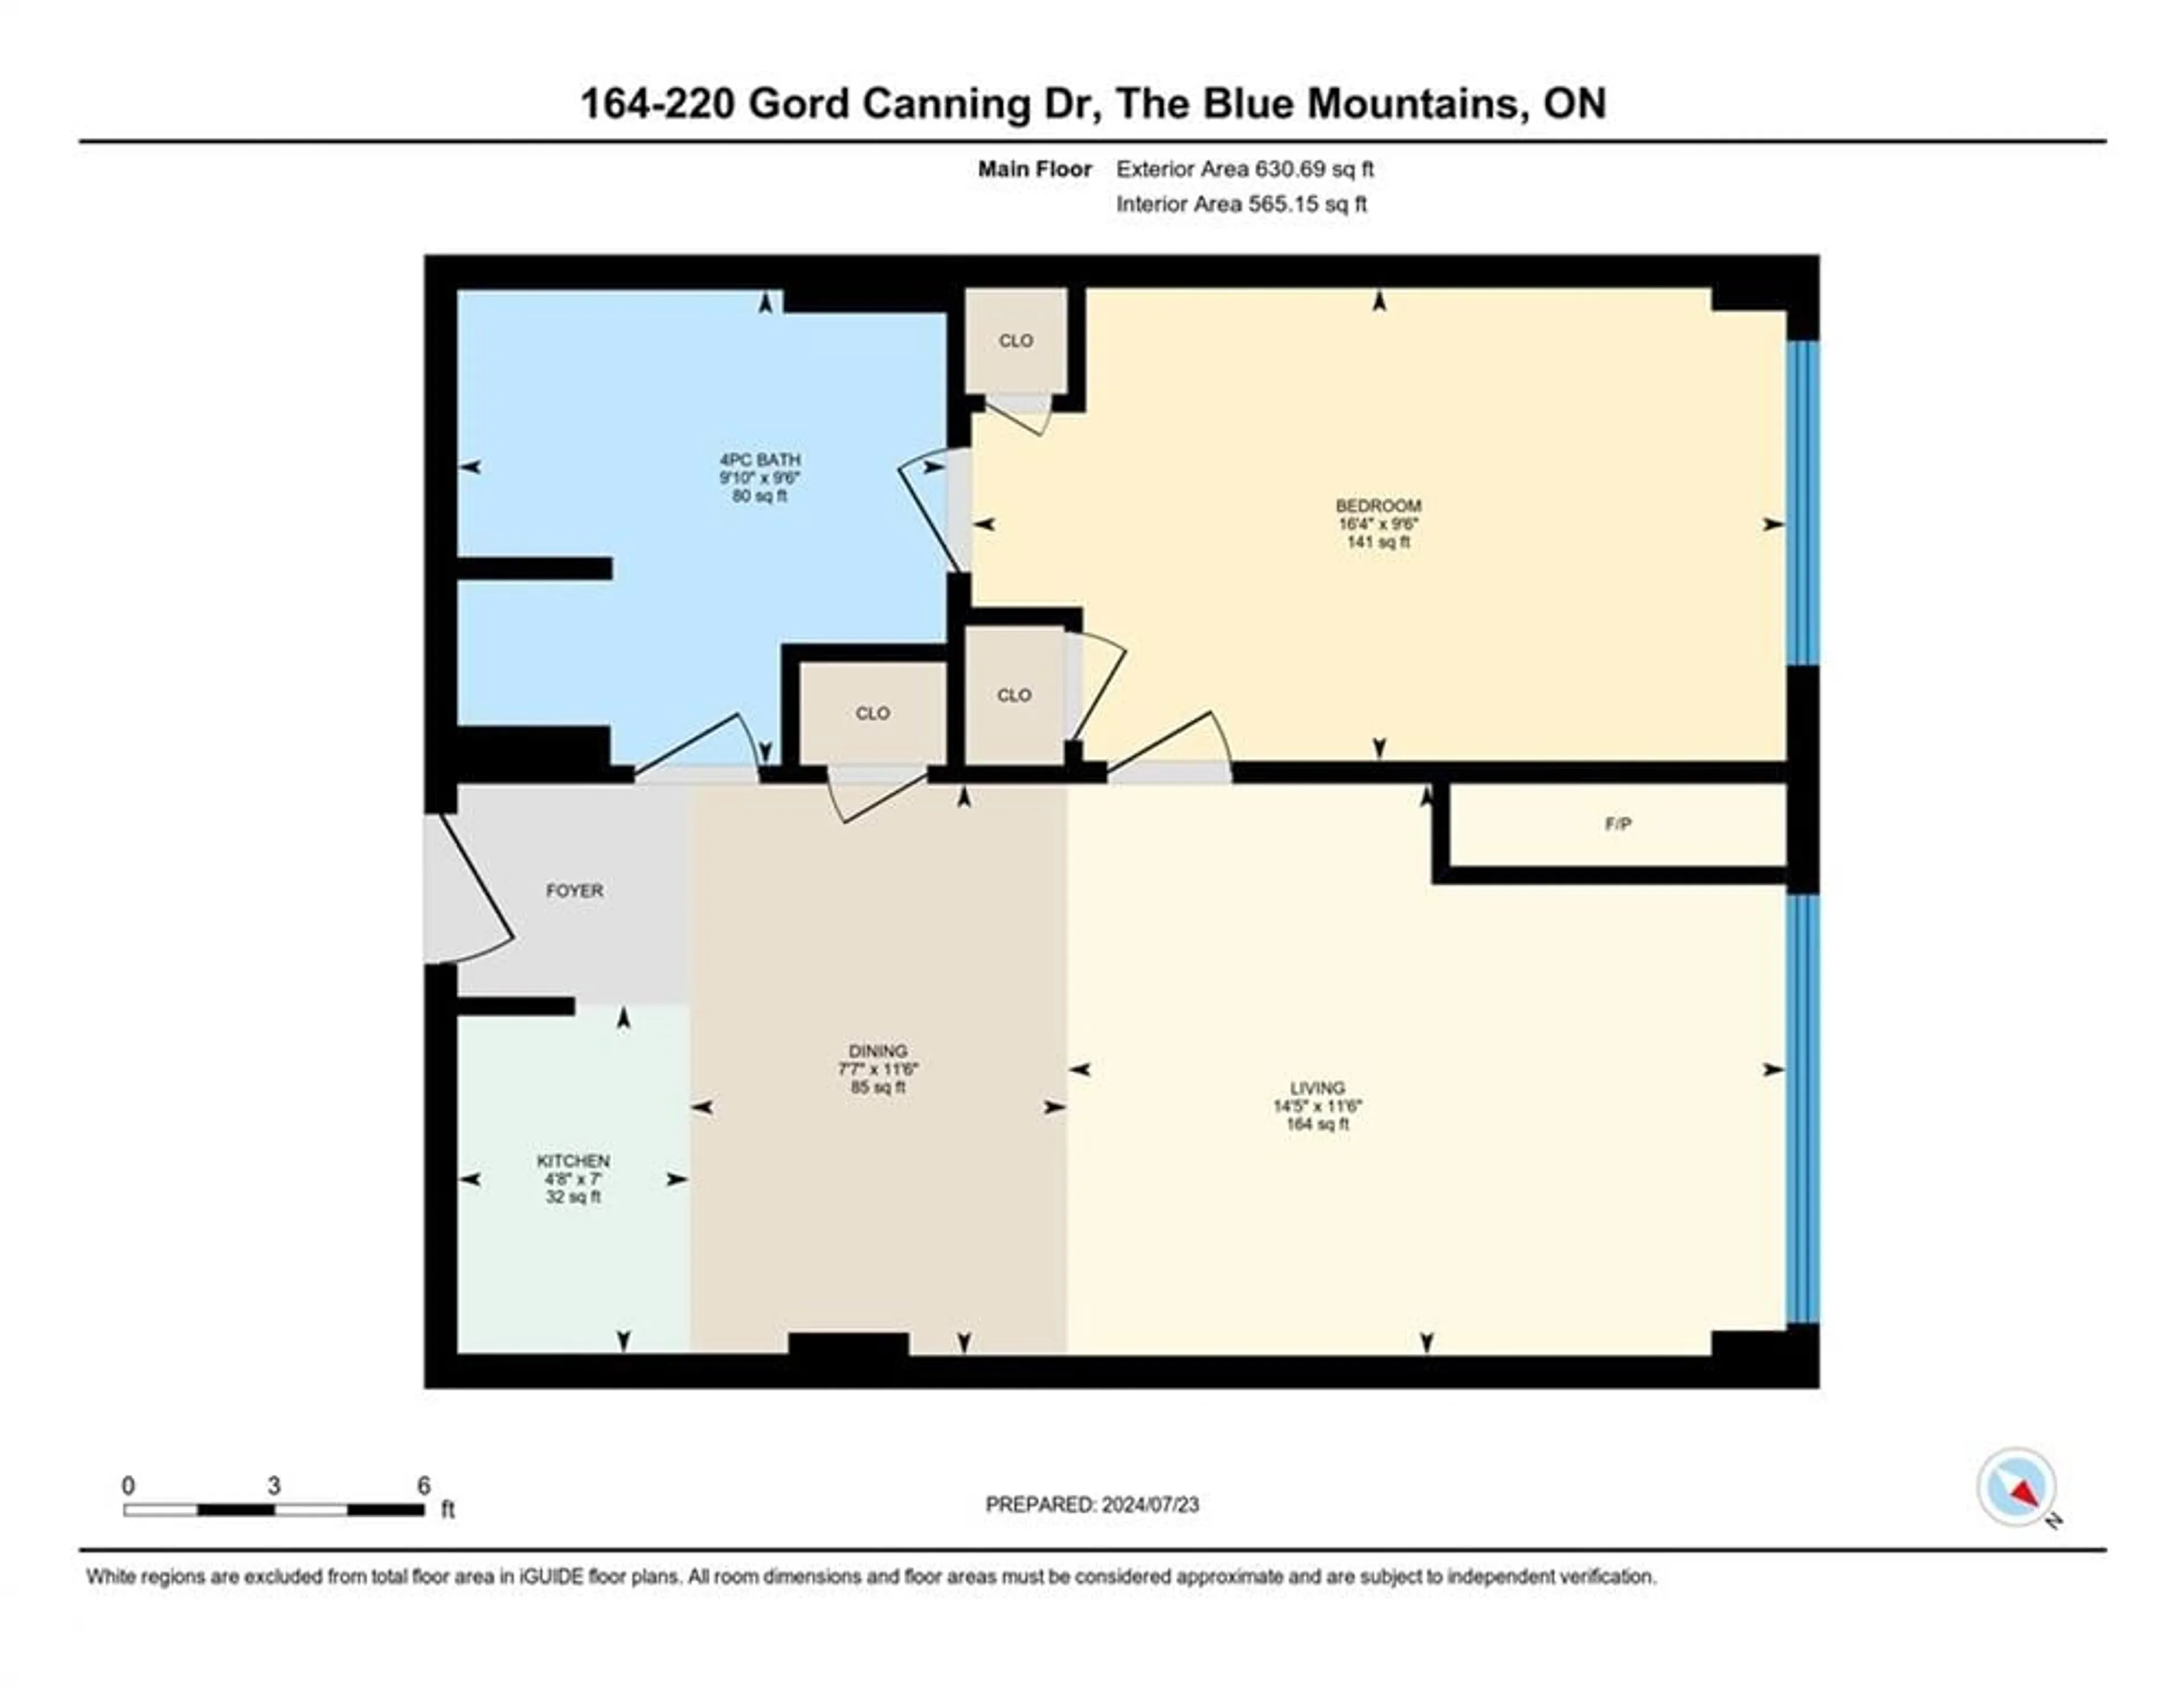 Floor plan for 220 Gord Canning Dr #164, The Blue Mountains Ontario L9Y 0V9